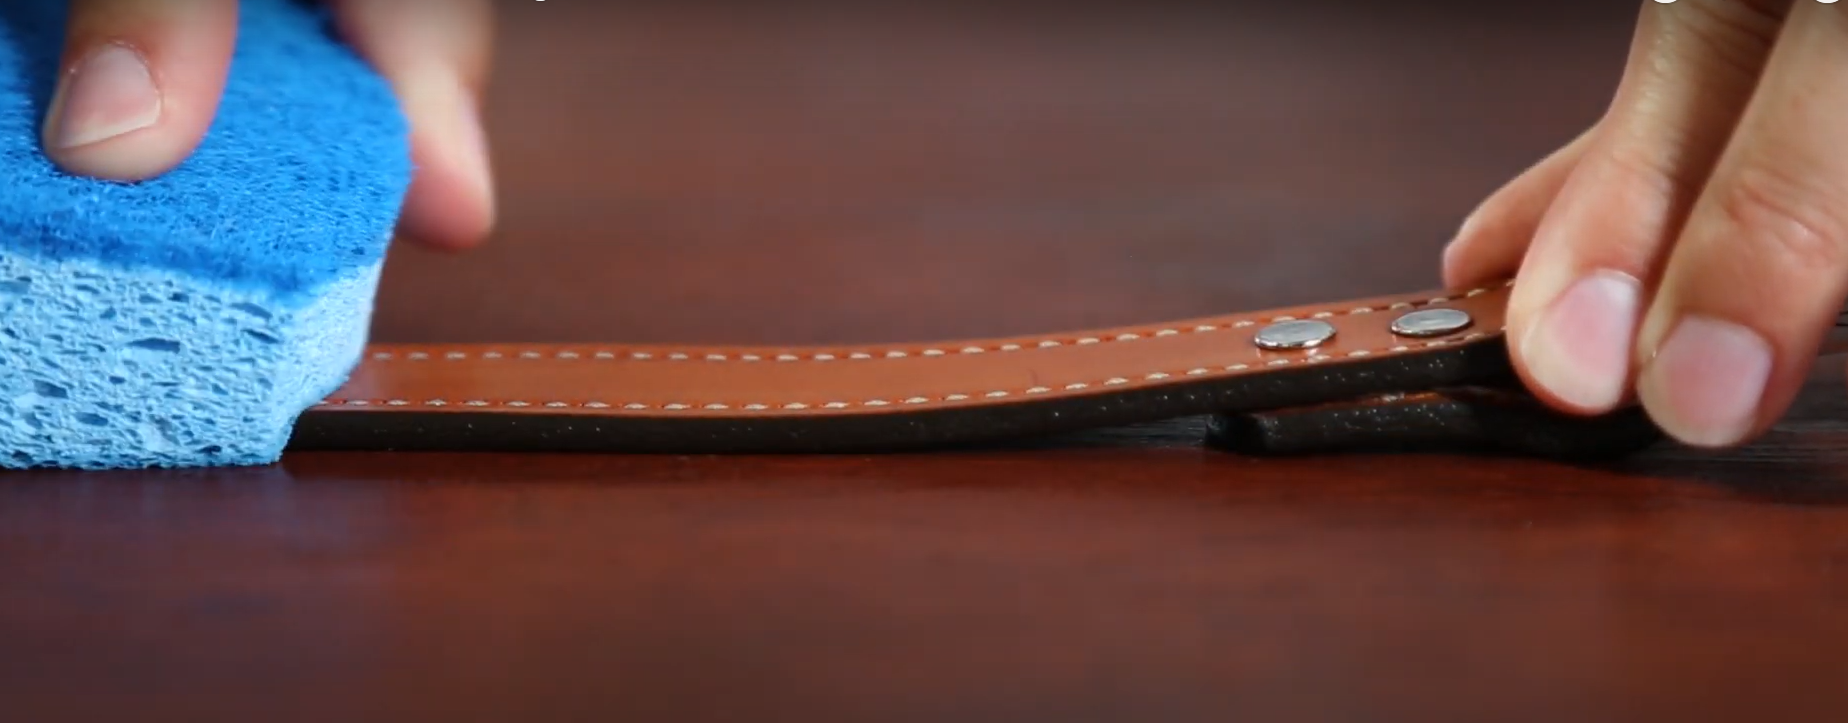 How to Clean a leather dog collar